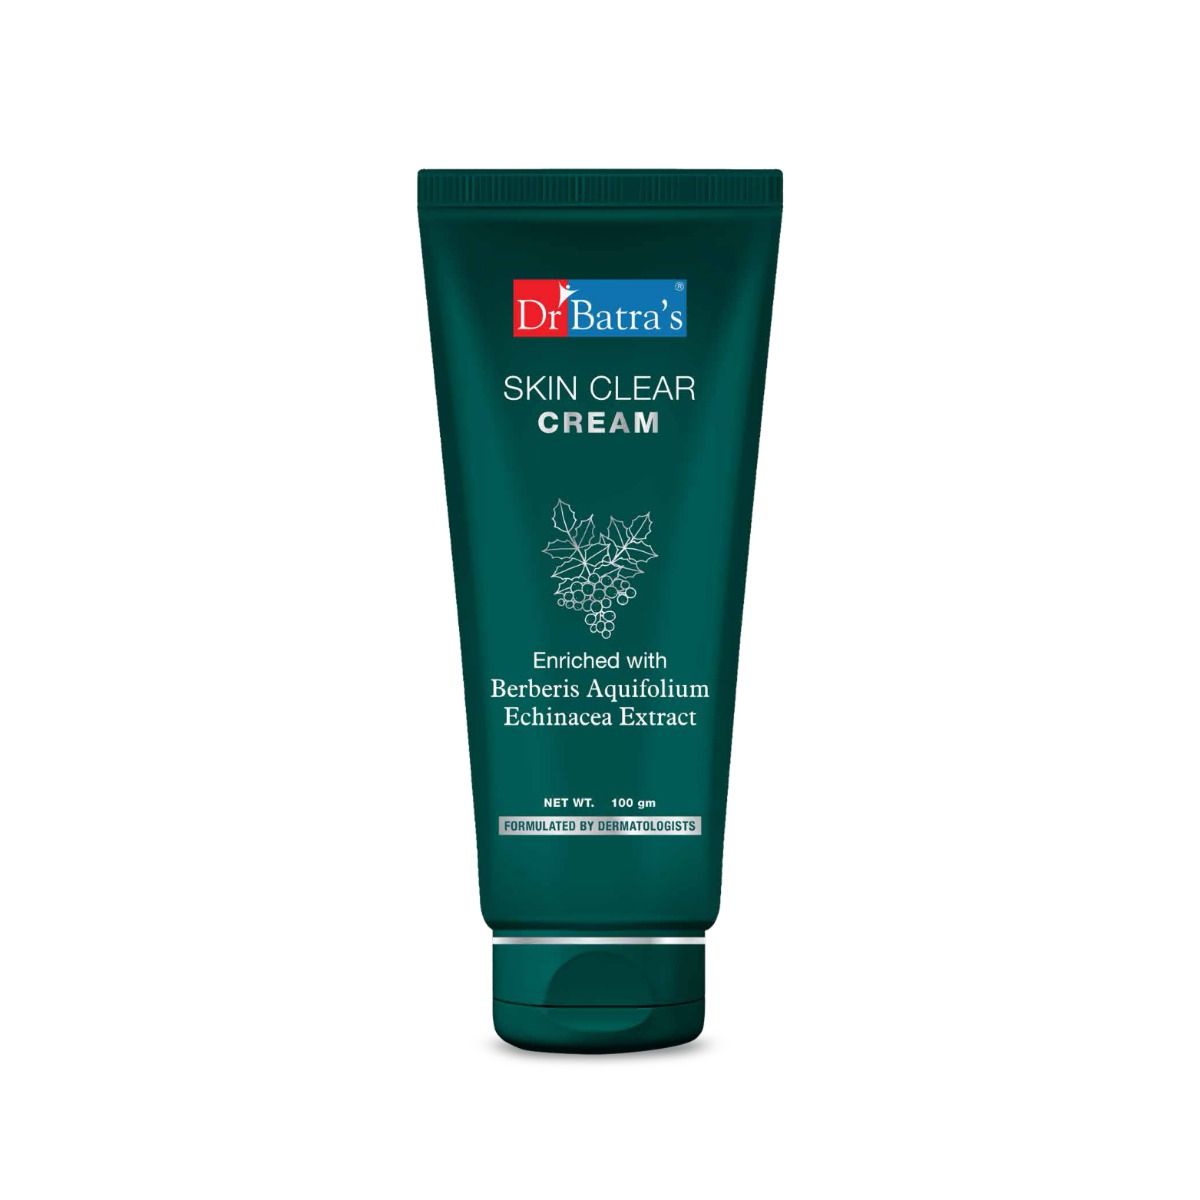     			Dr Batra's Skin Clear Cream, Enriched With Kokum Butter, Olive Oil & Echinacea Purpurea, Formulated with naturals (100g)